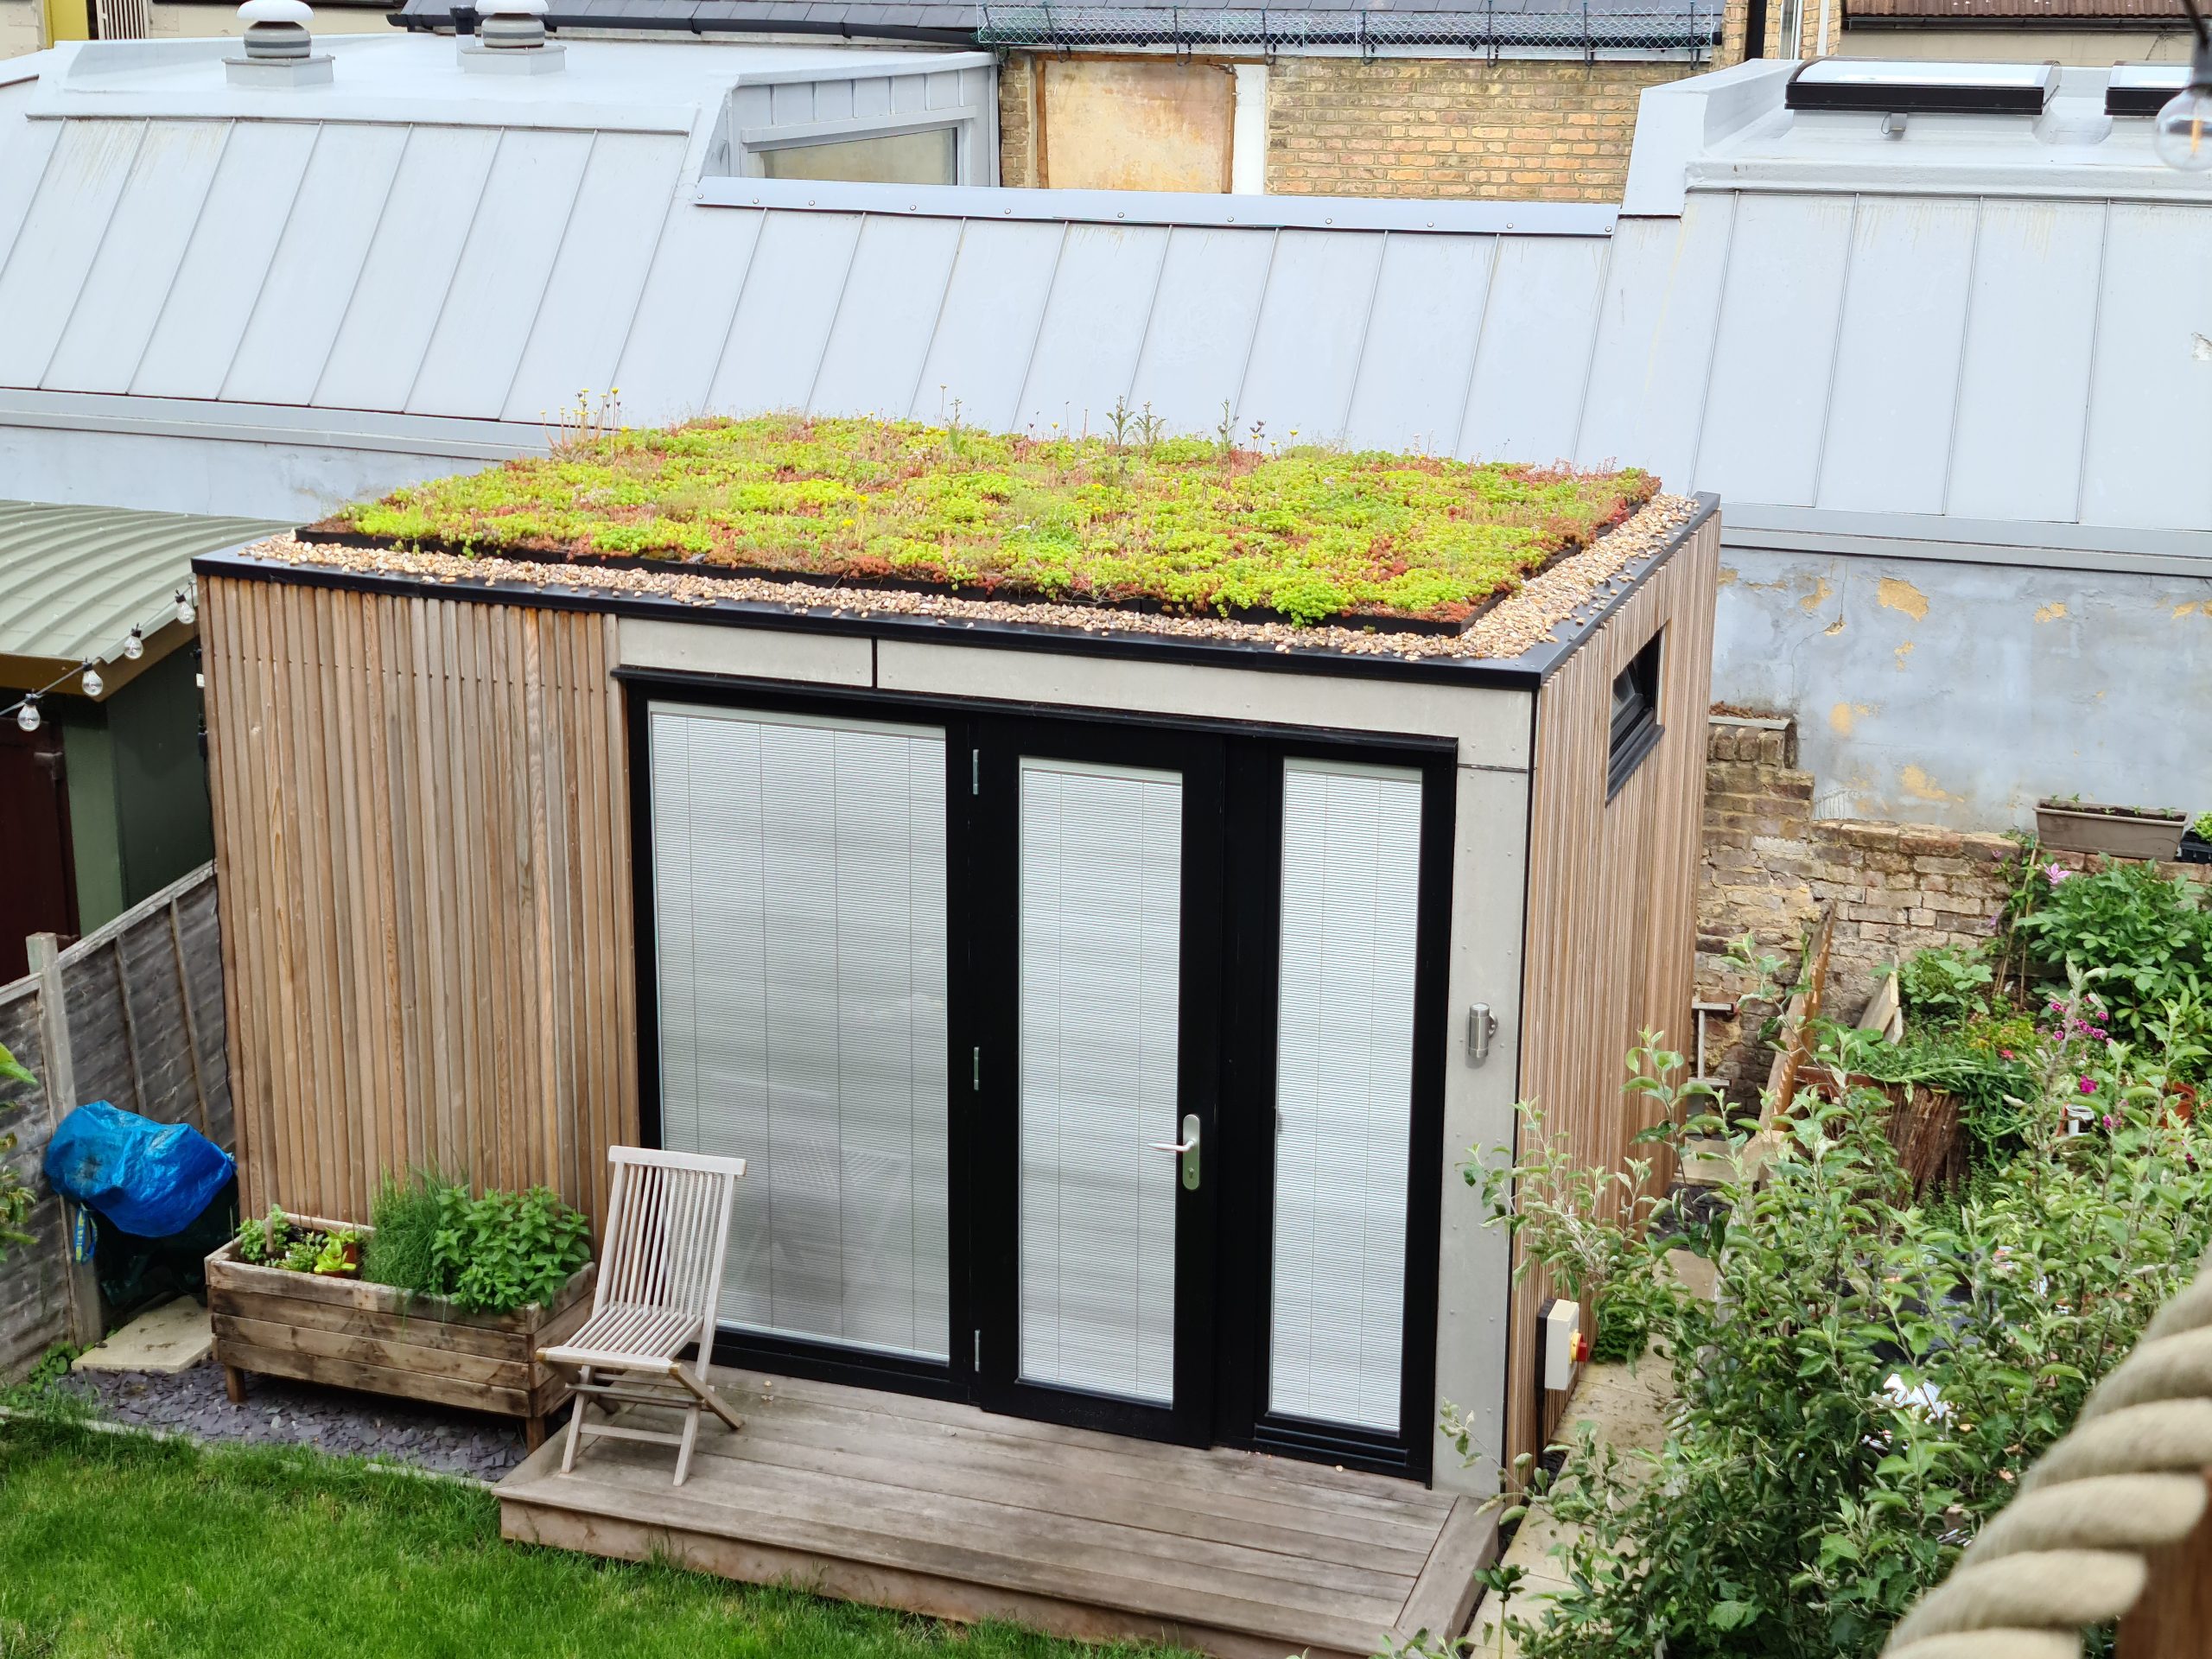 Is the boom in green roofs and living walls good for sustainability? Yes!